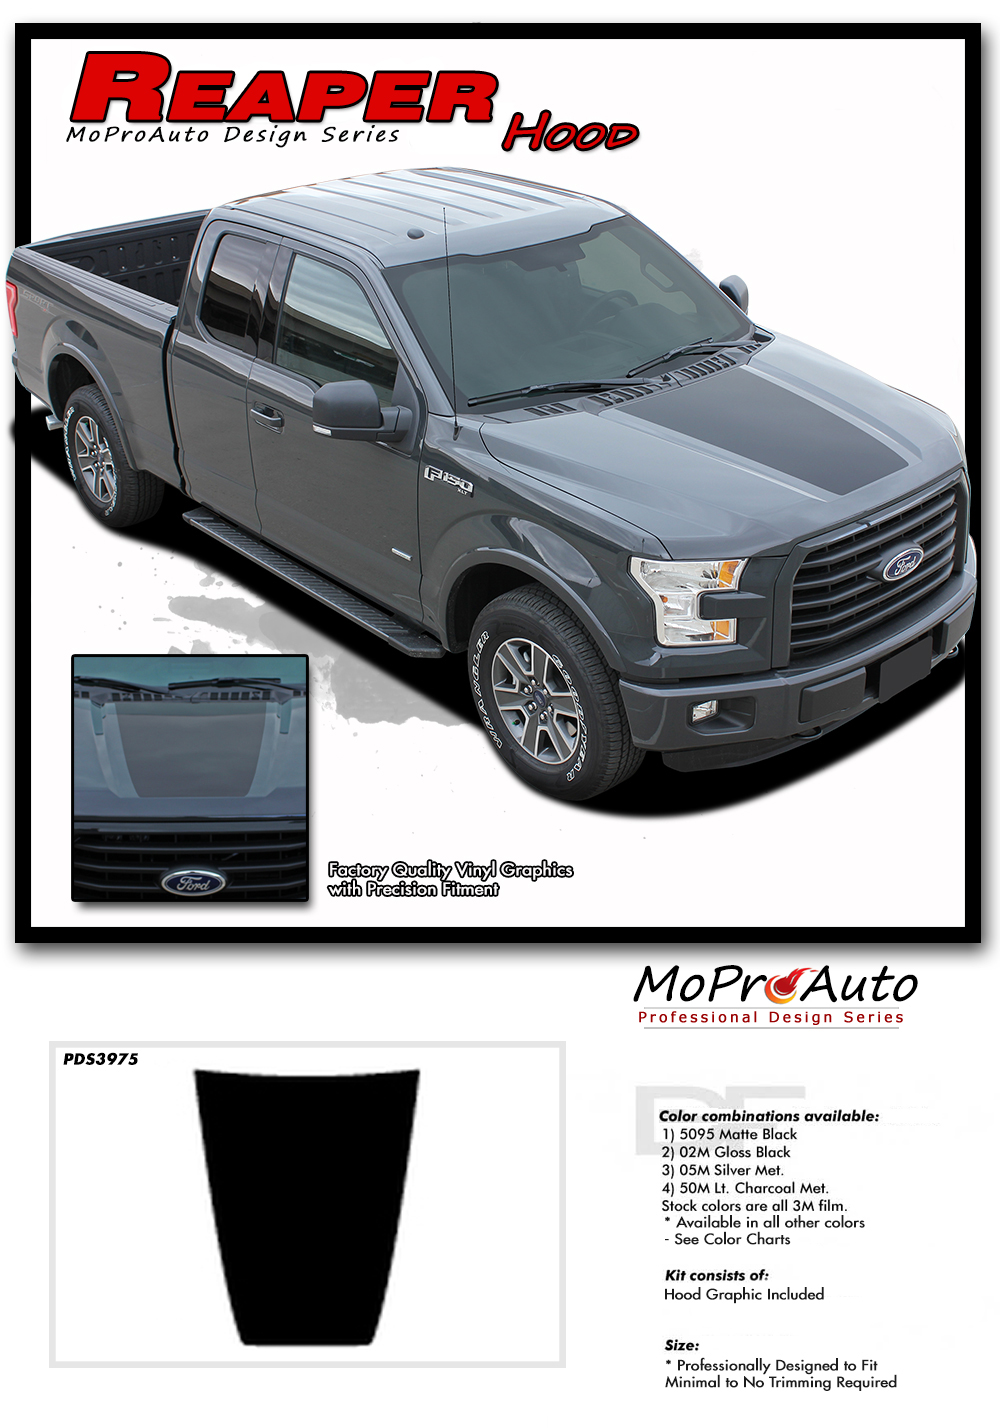 2015, 2016, 2017, 2018, 2019, 2020 Hood Solid Ford F-Series F-150 Appearance Package Vinyl Graphics and Decals Kit by MoProAuto Pro Design Series